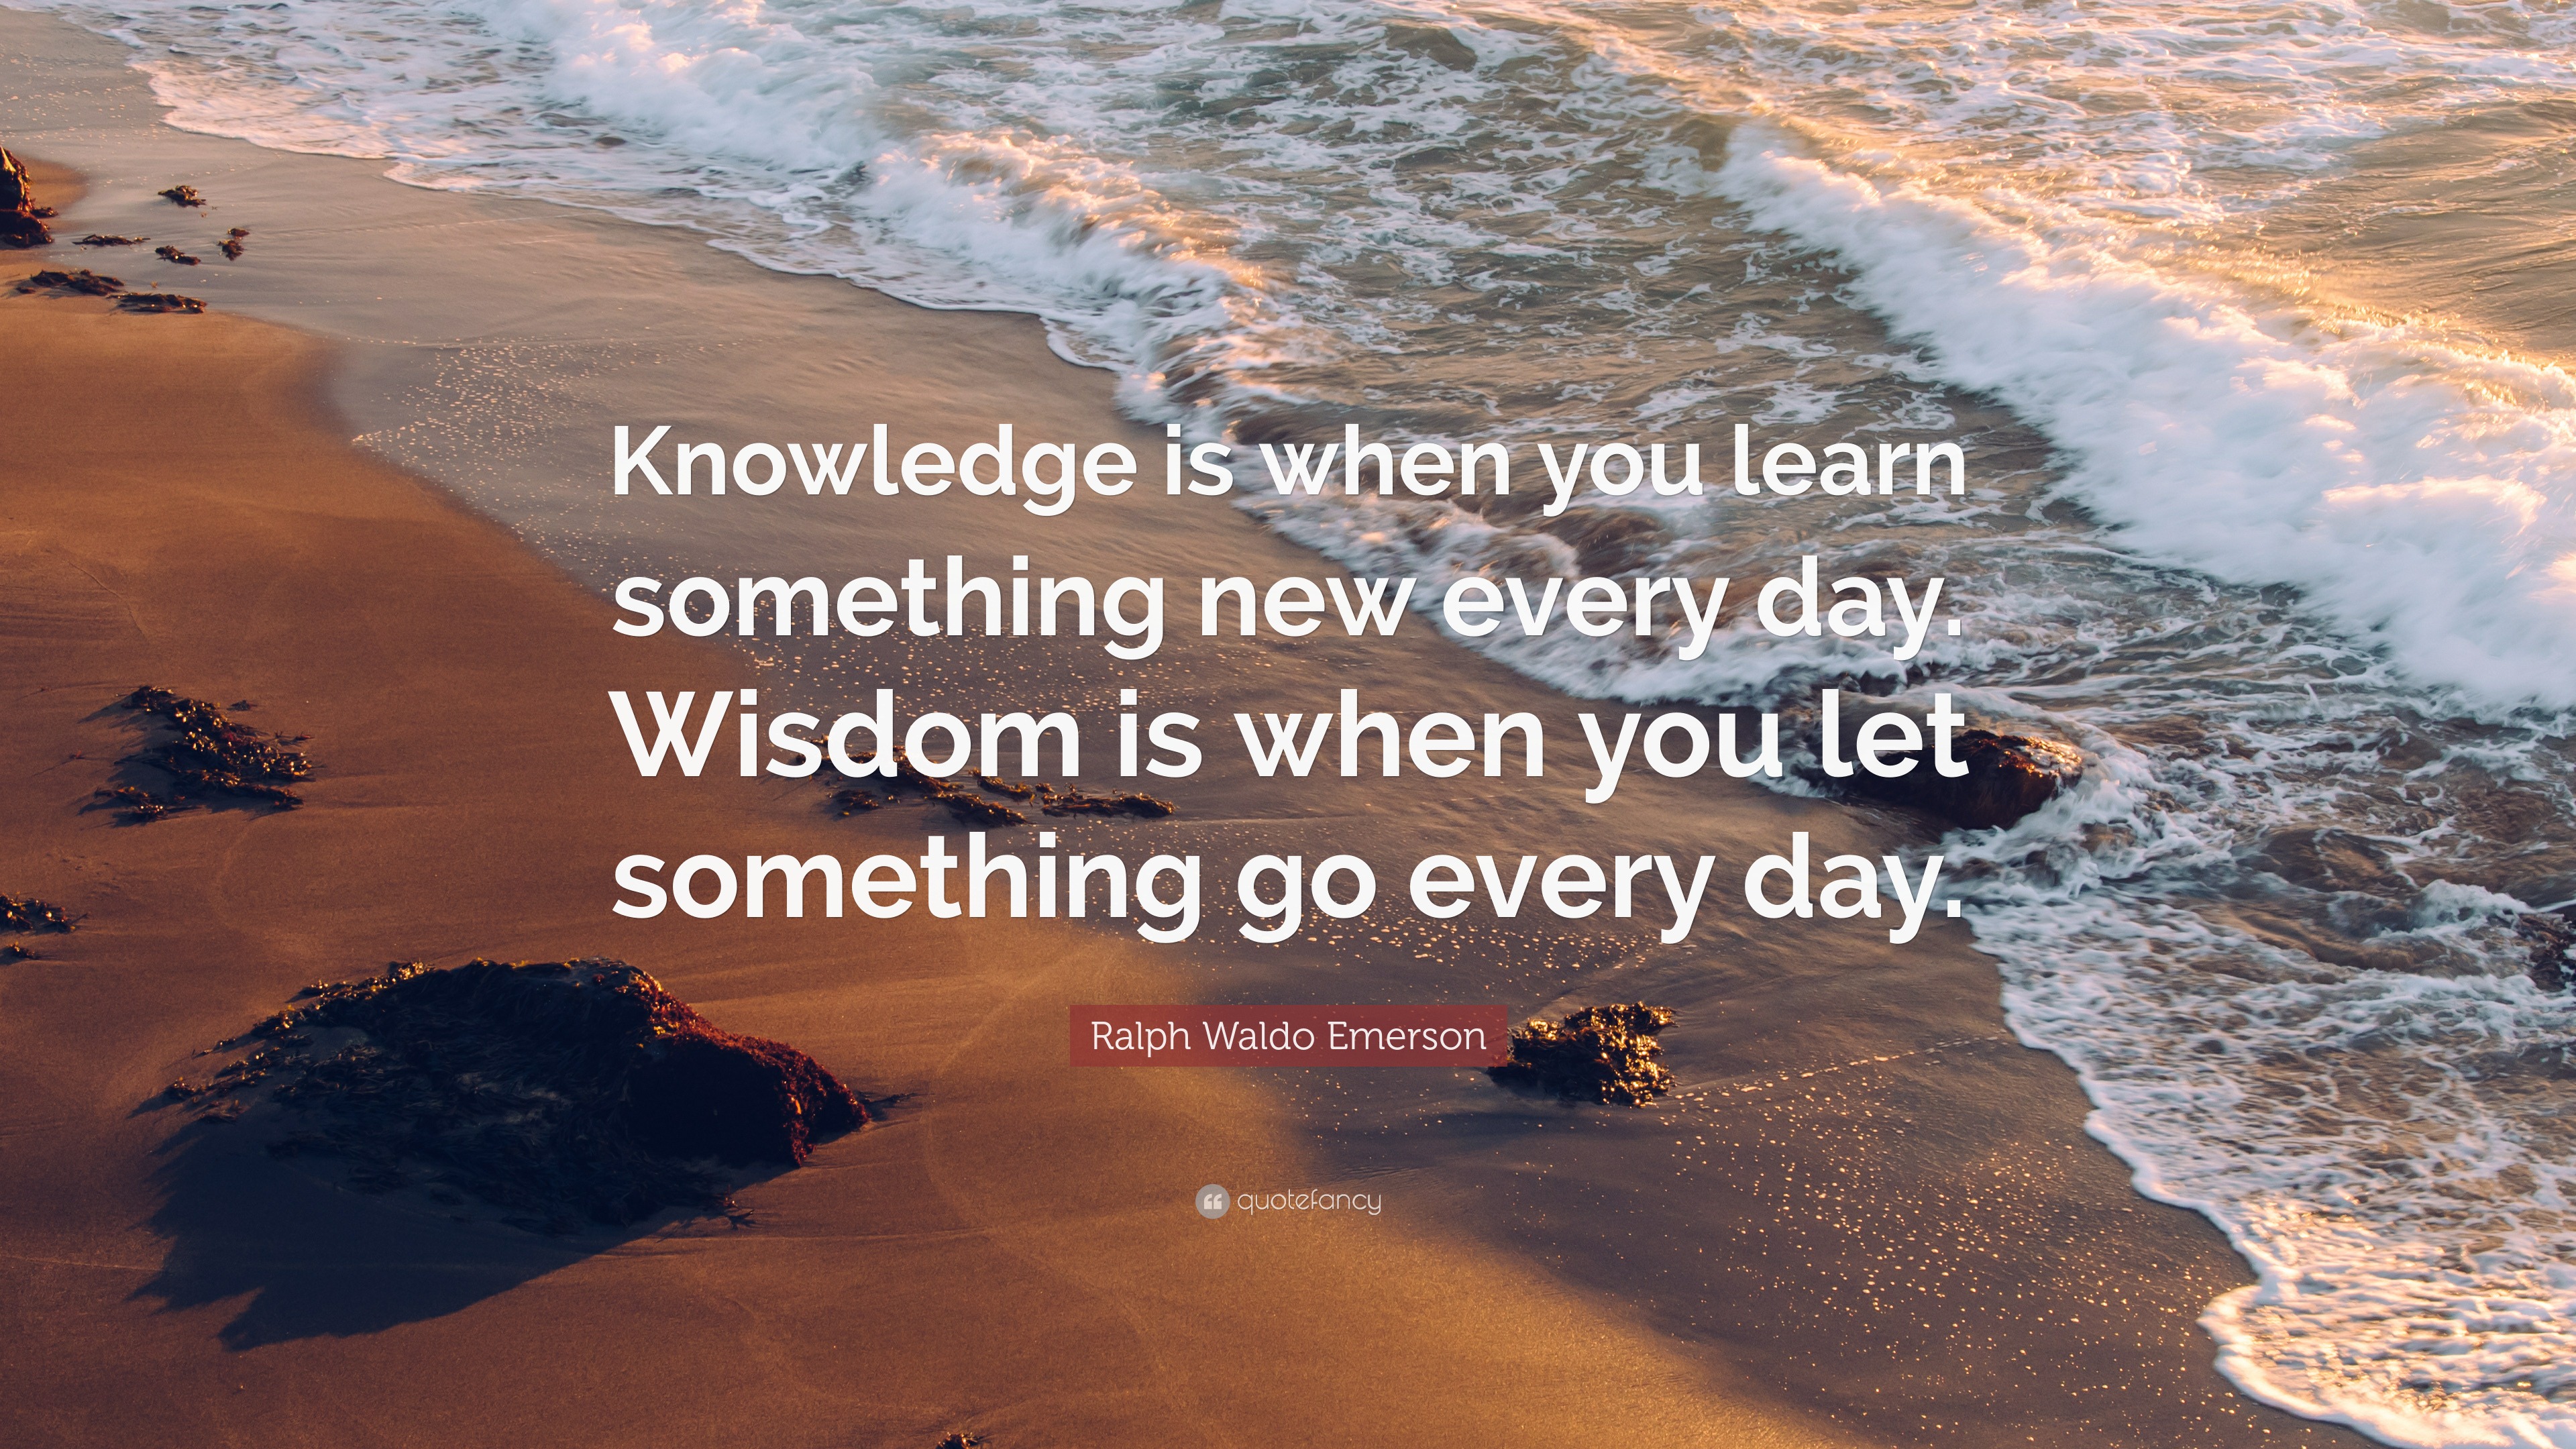 Ralph Waldo Emerson Quote: “Knowledge is when you learn something new